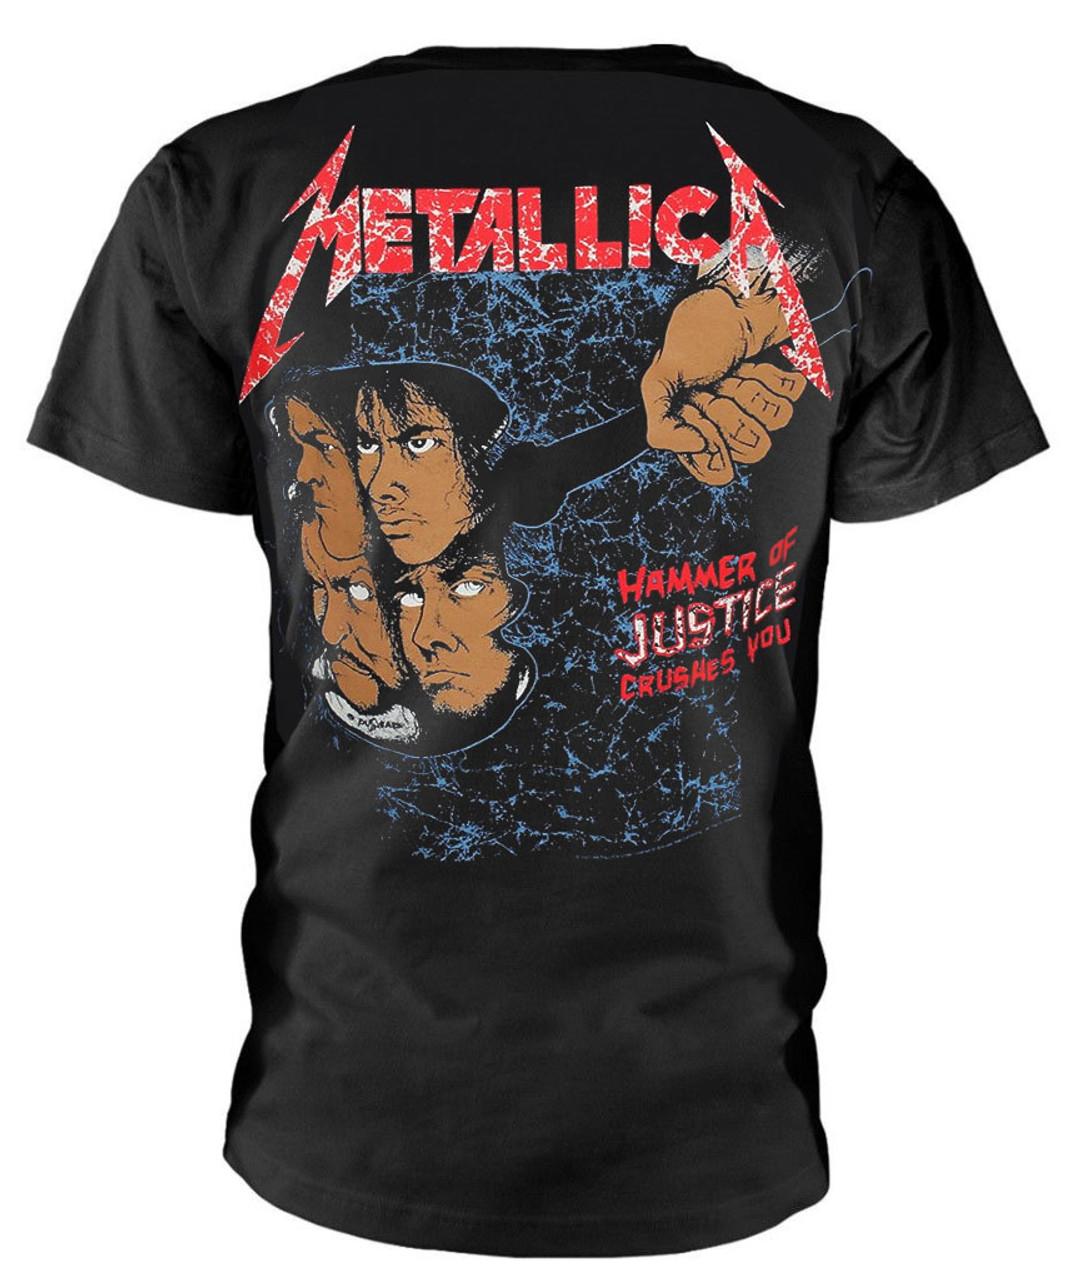 Metallica 'Hammer Of Justice For All' T-Shirt